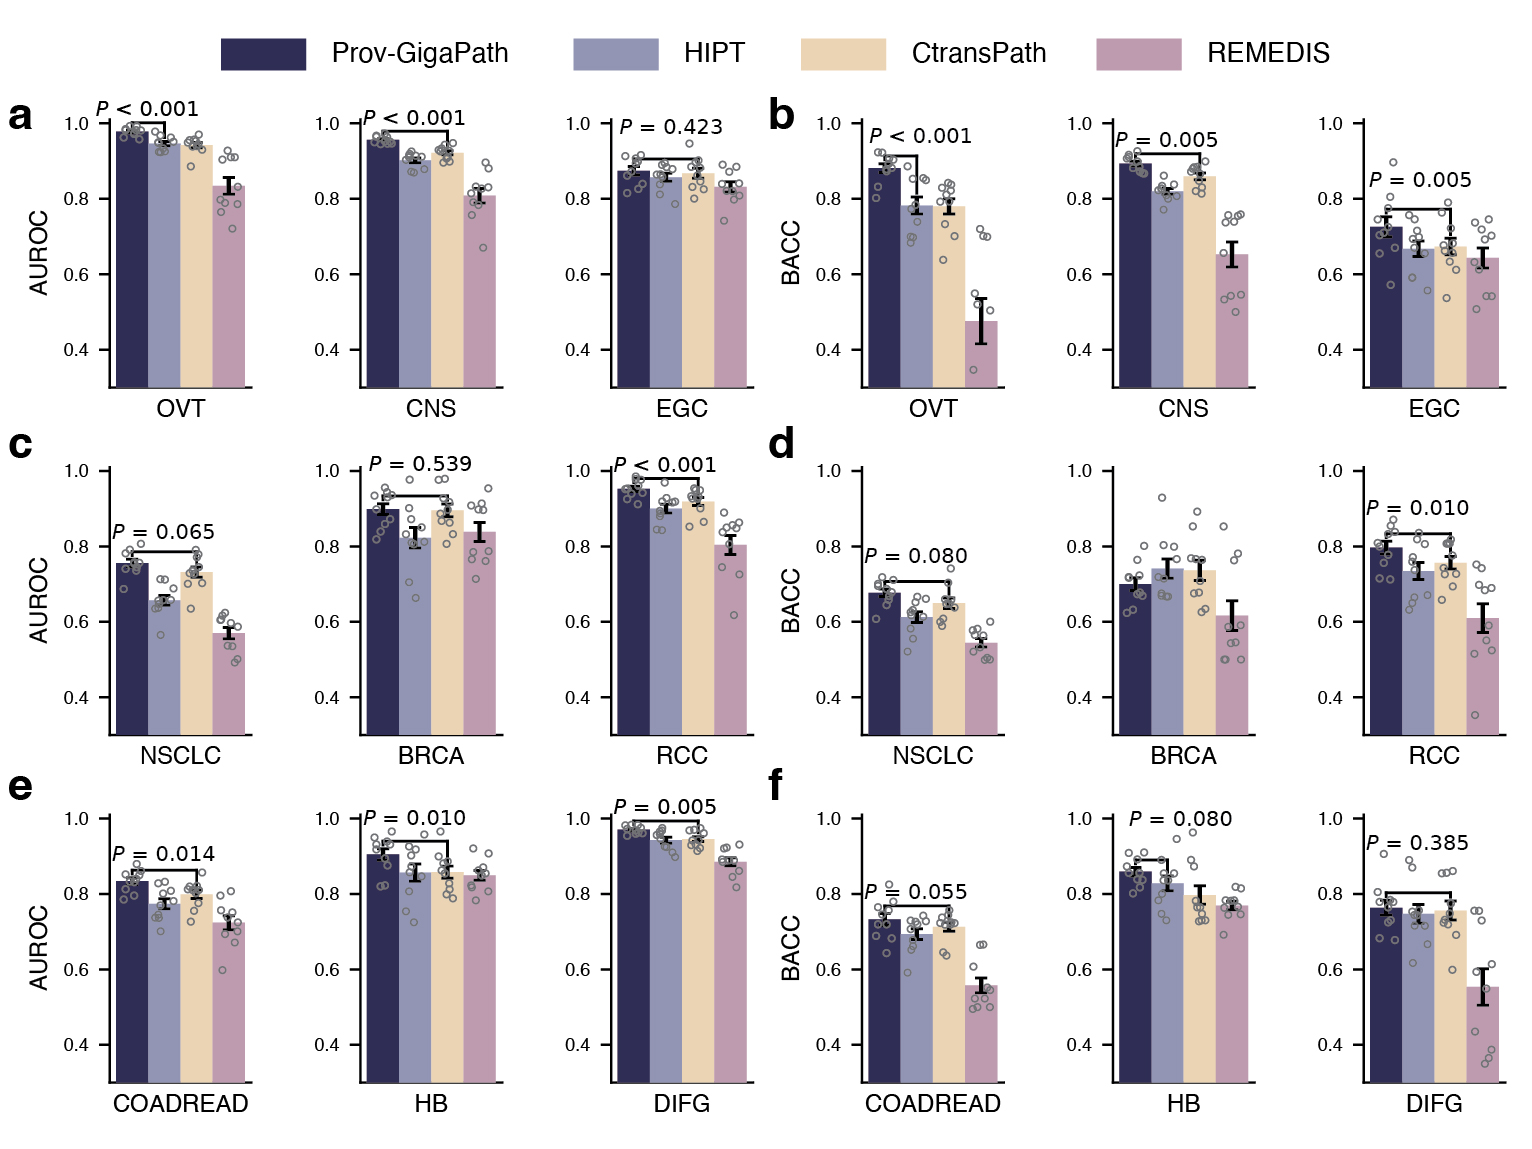 Figure 3: Comparison on cancer subtyping. Bar plots comparing cancer subtyping performance in terms of AUROC (a,c,e) and balanced accuracy (b,d,f) on nine cancer types. Data are mean ± s.e.m. across n = 10 independent experiments. The listed P value indicates the significance for Prov-GigaPath outperforming the best comparison approach, with one-sided Wilcoxon test. BACC, balanced accuracy. BRCA, breast invasive carcinoma; CNS, central nervous system; COADREAD, colorectal adenocarcinoma; DIFG, diffuse intrinsic pontine glioma; EGC, early gastric cancer; HB, hepatobiliary; NSCLC, non-small cell lung cancer; OVT, ovarian tumor; RCC, renal cell cancer. 